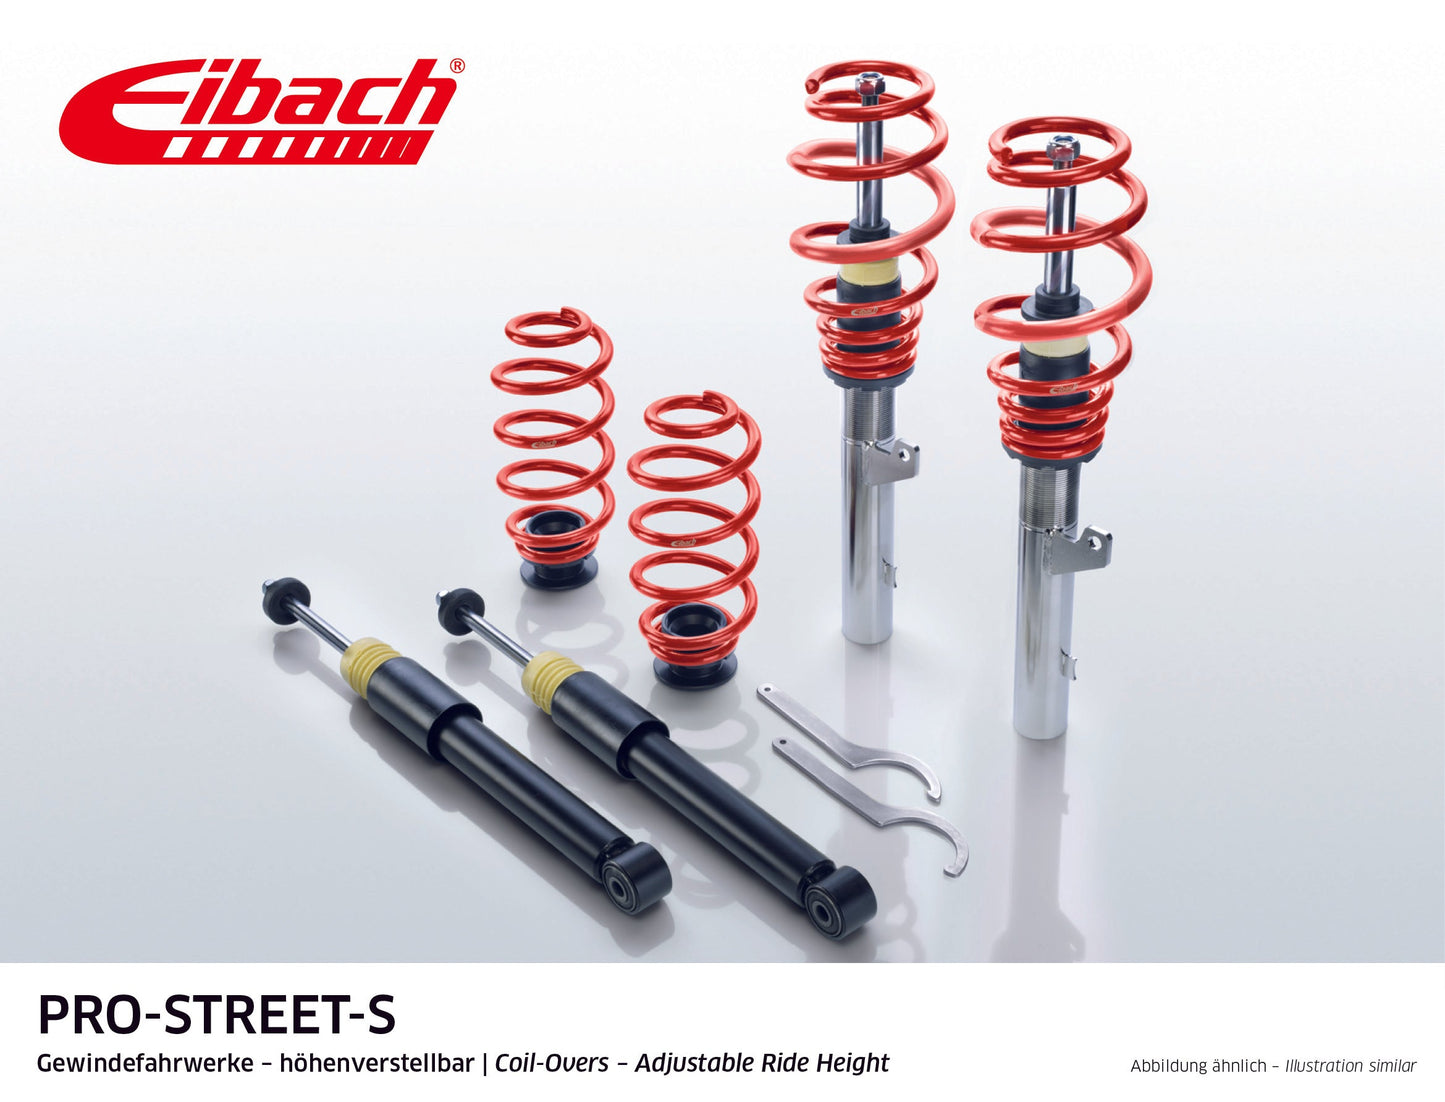 Eibach Pro-Street Coilover (PSS65-15-020-01-22) at £1072.08